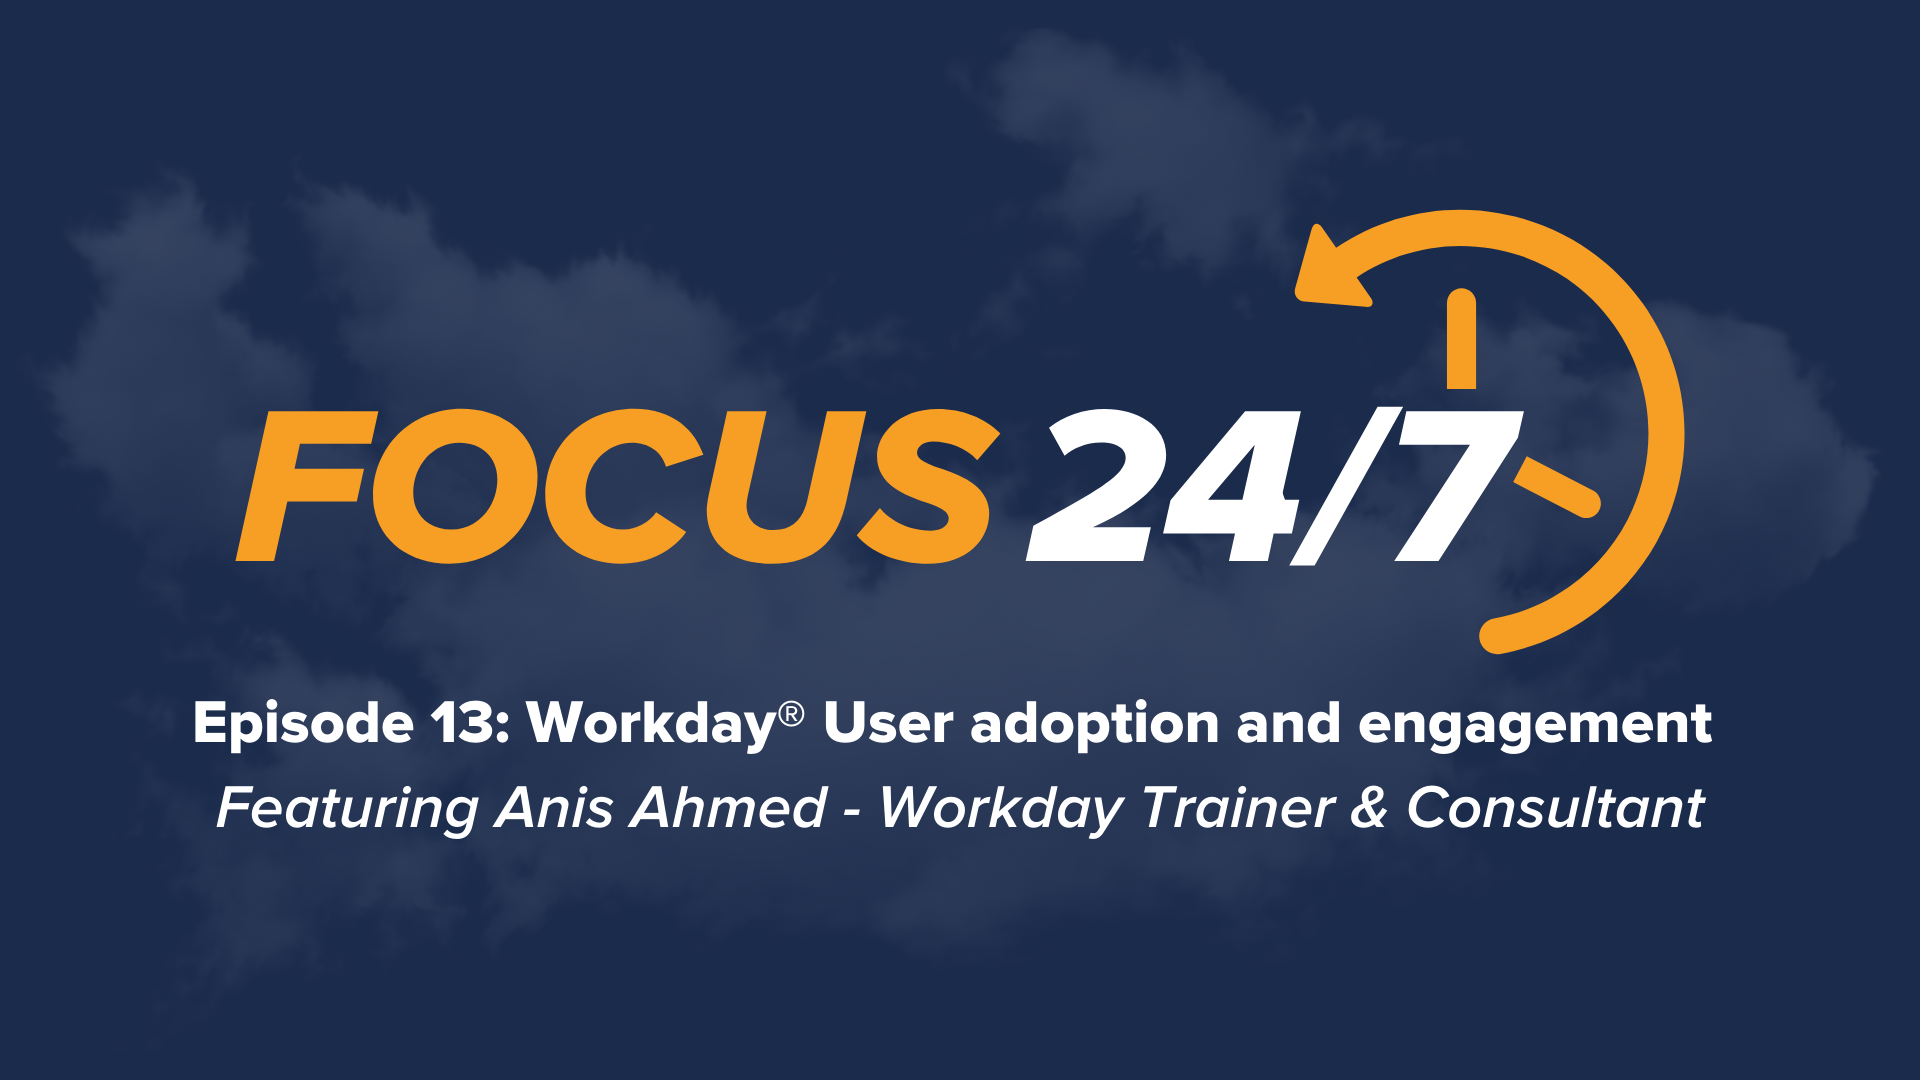 Focus 24/7 | Episode #13 | Workday® User adoption and engagement with Anis Ahmed